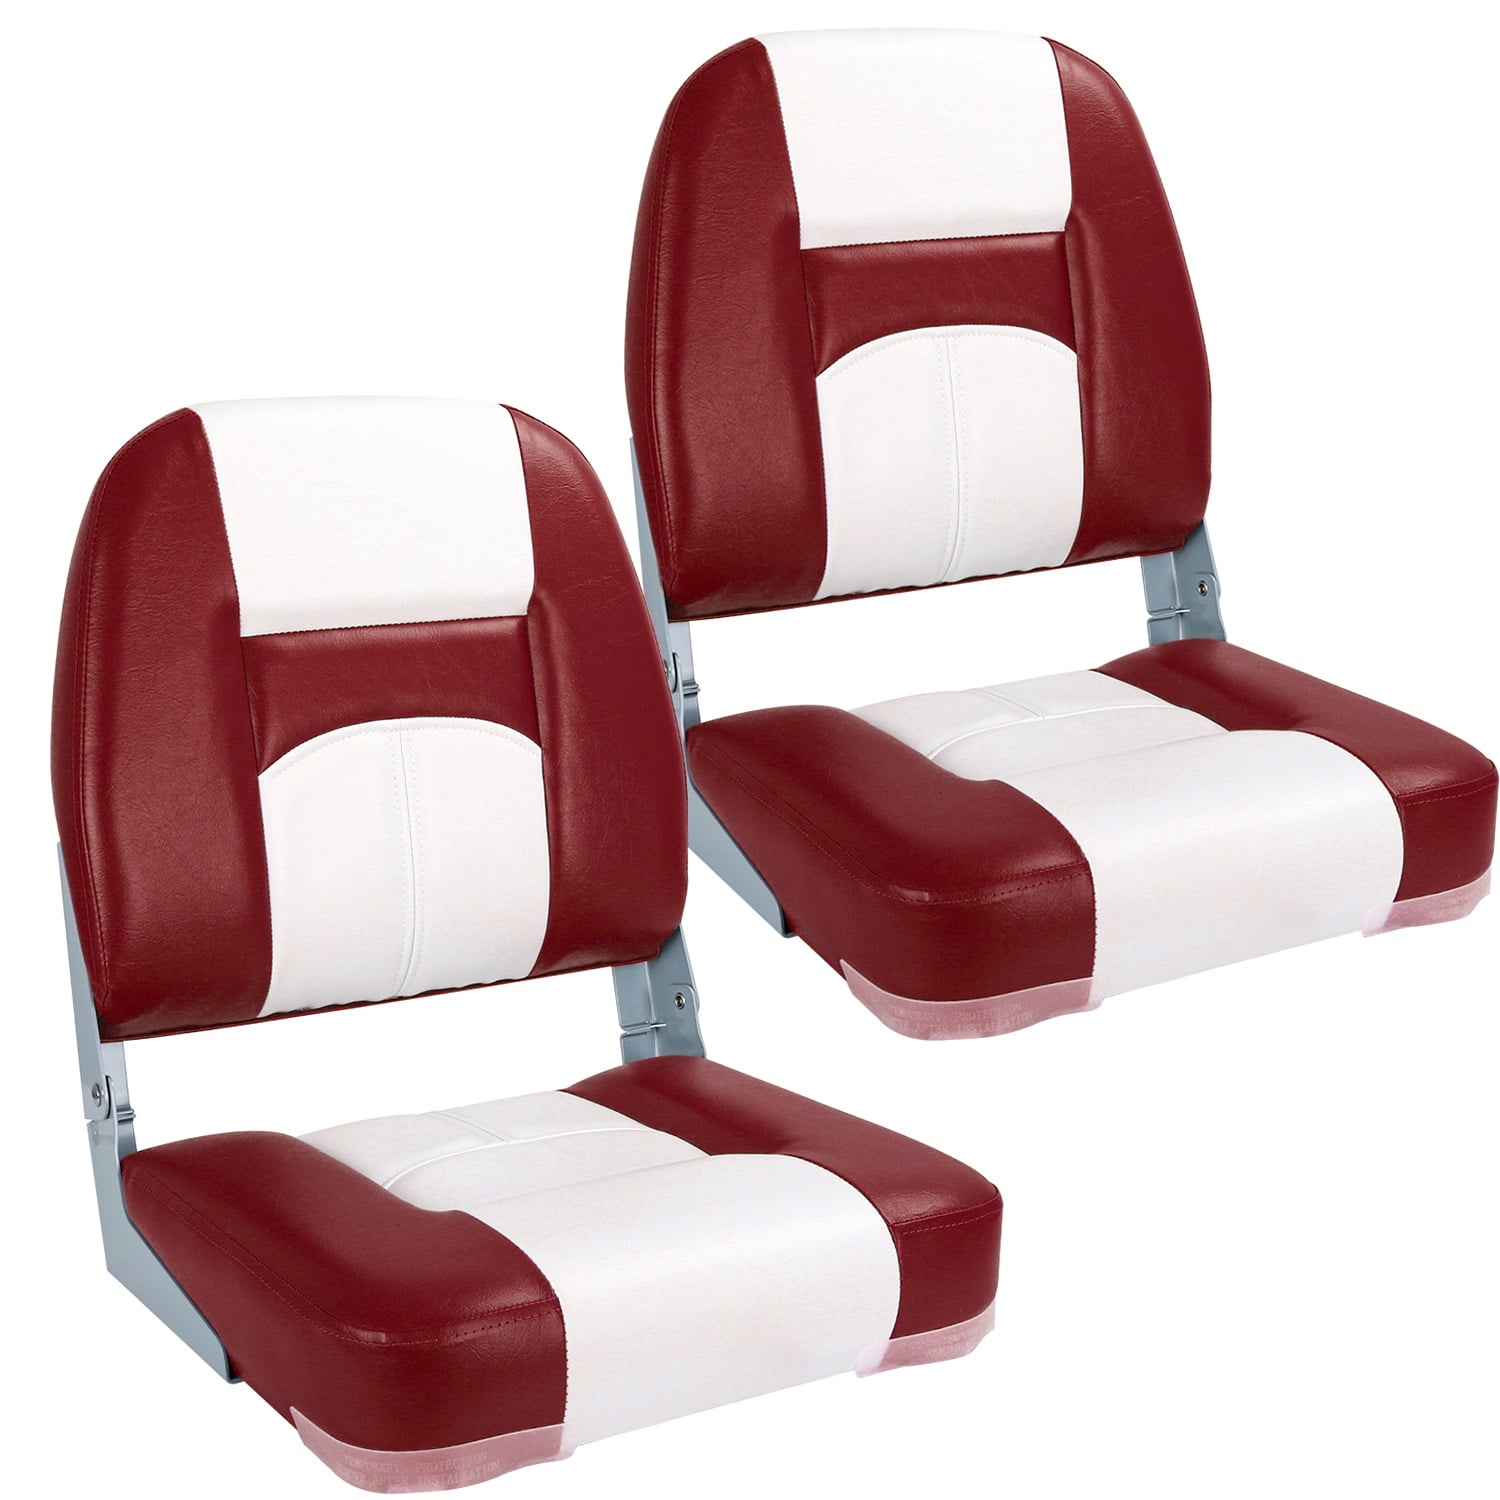 NORTHCAPTAIN Deluxe White/Wine Red Low Back Folding Boat Seat, 2 Seats